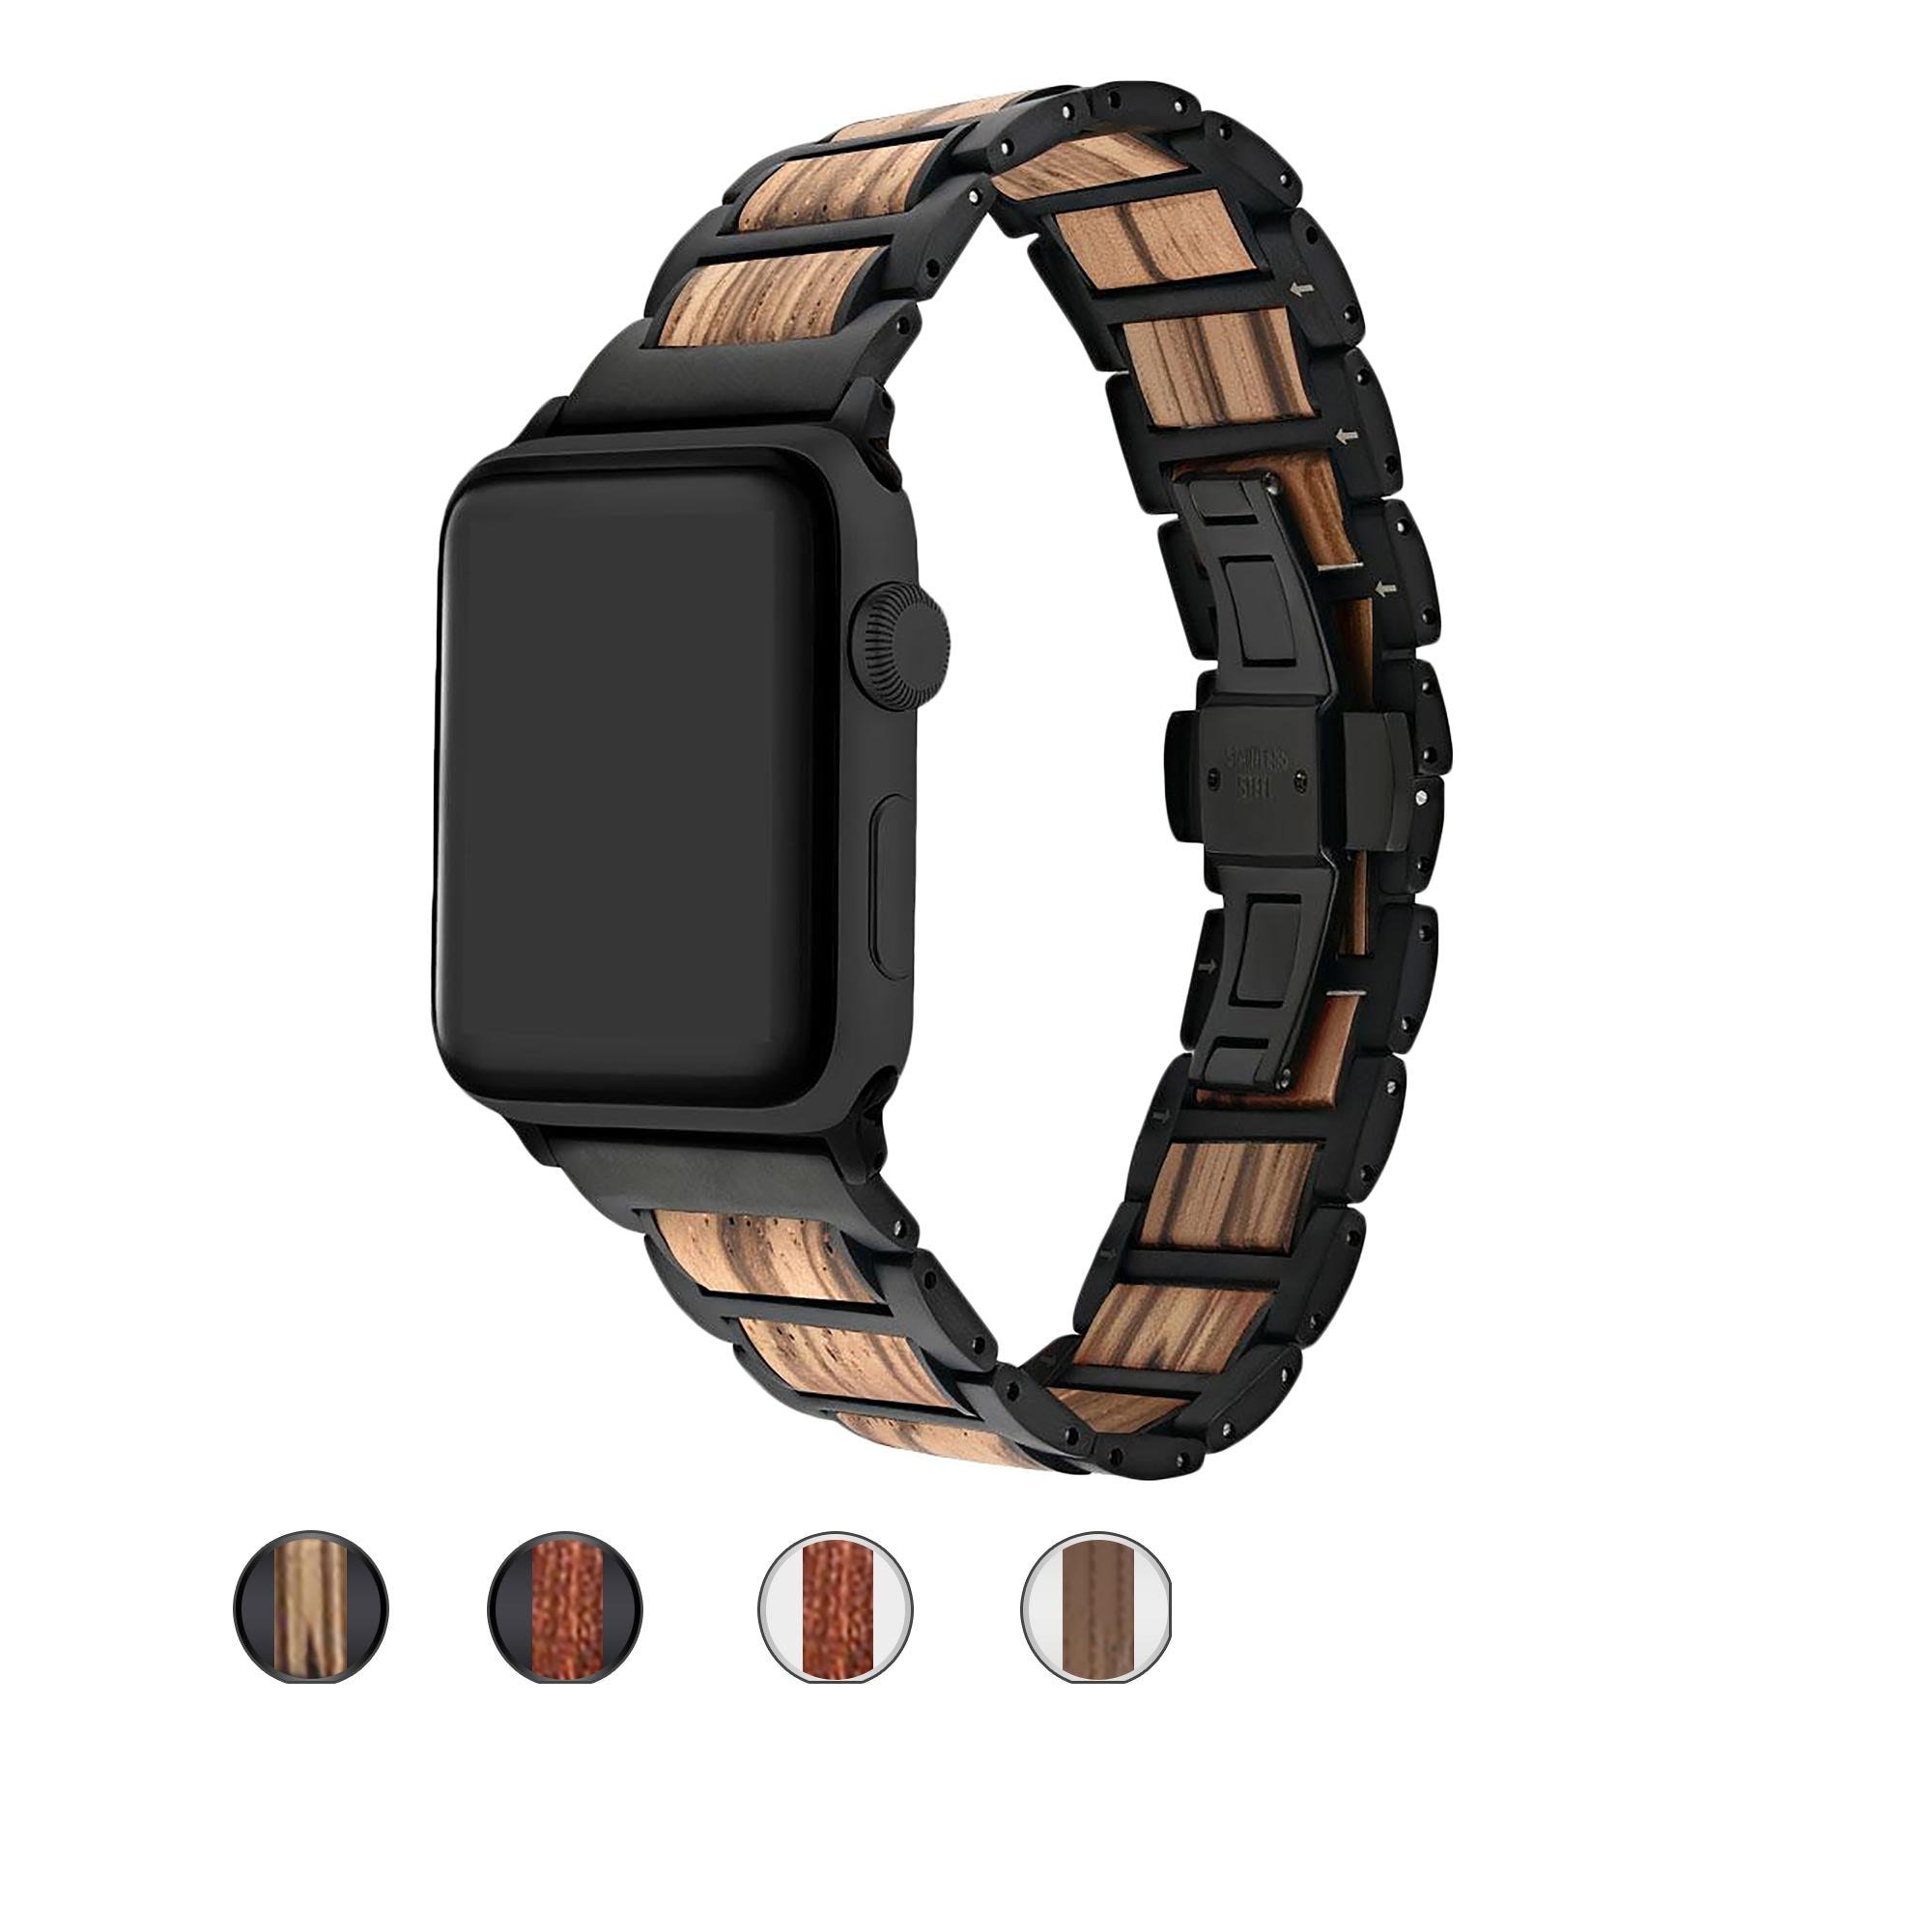 The Most Breathable Apple Watch Band - Epic Watch Bands